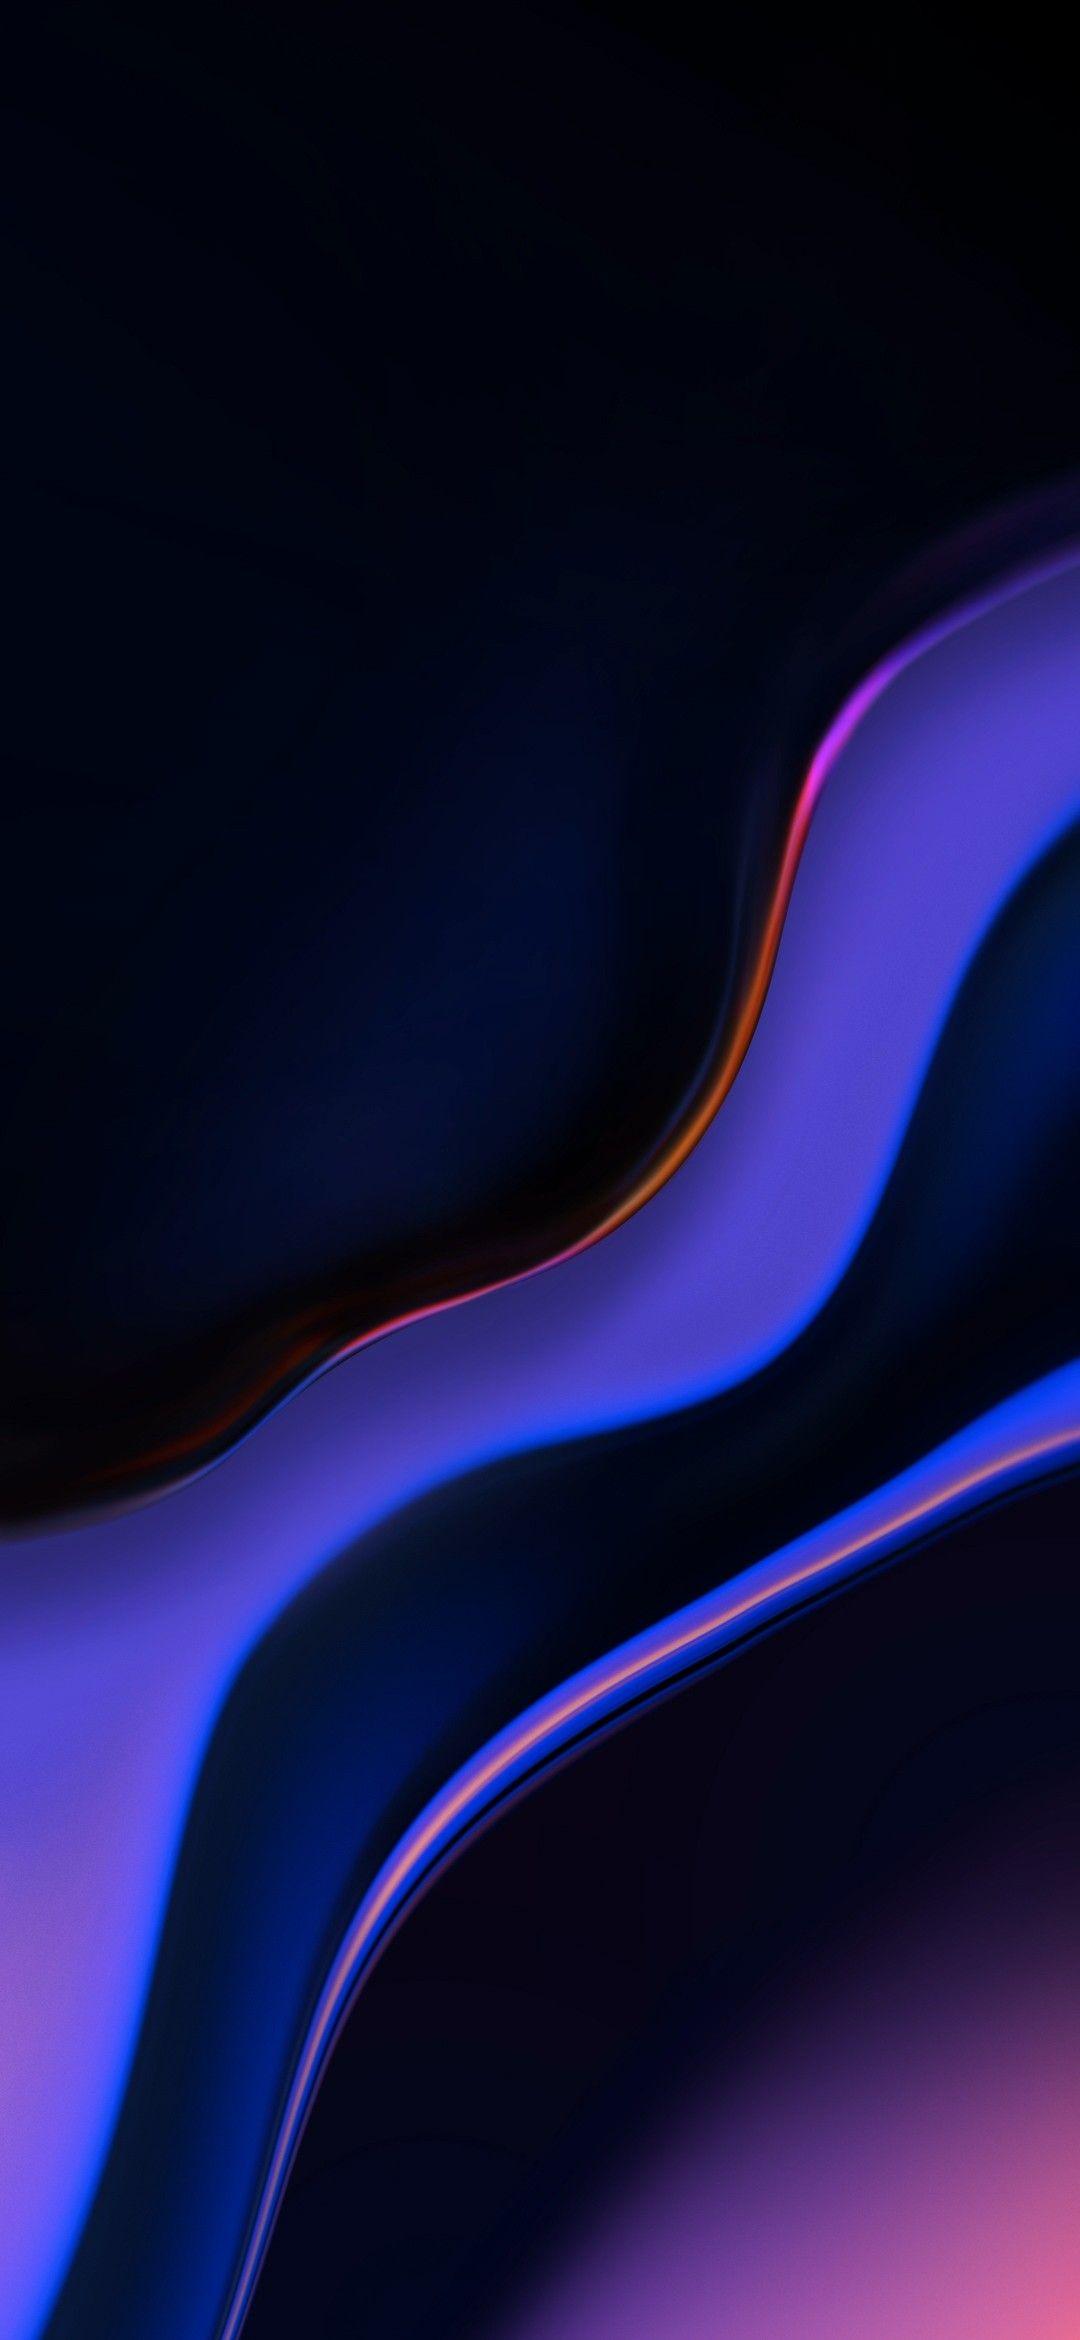 OnePlus 6t. Bein An Aquarius is :All About Me, and My color